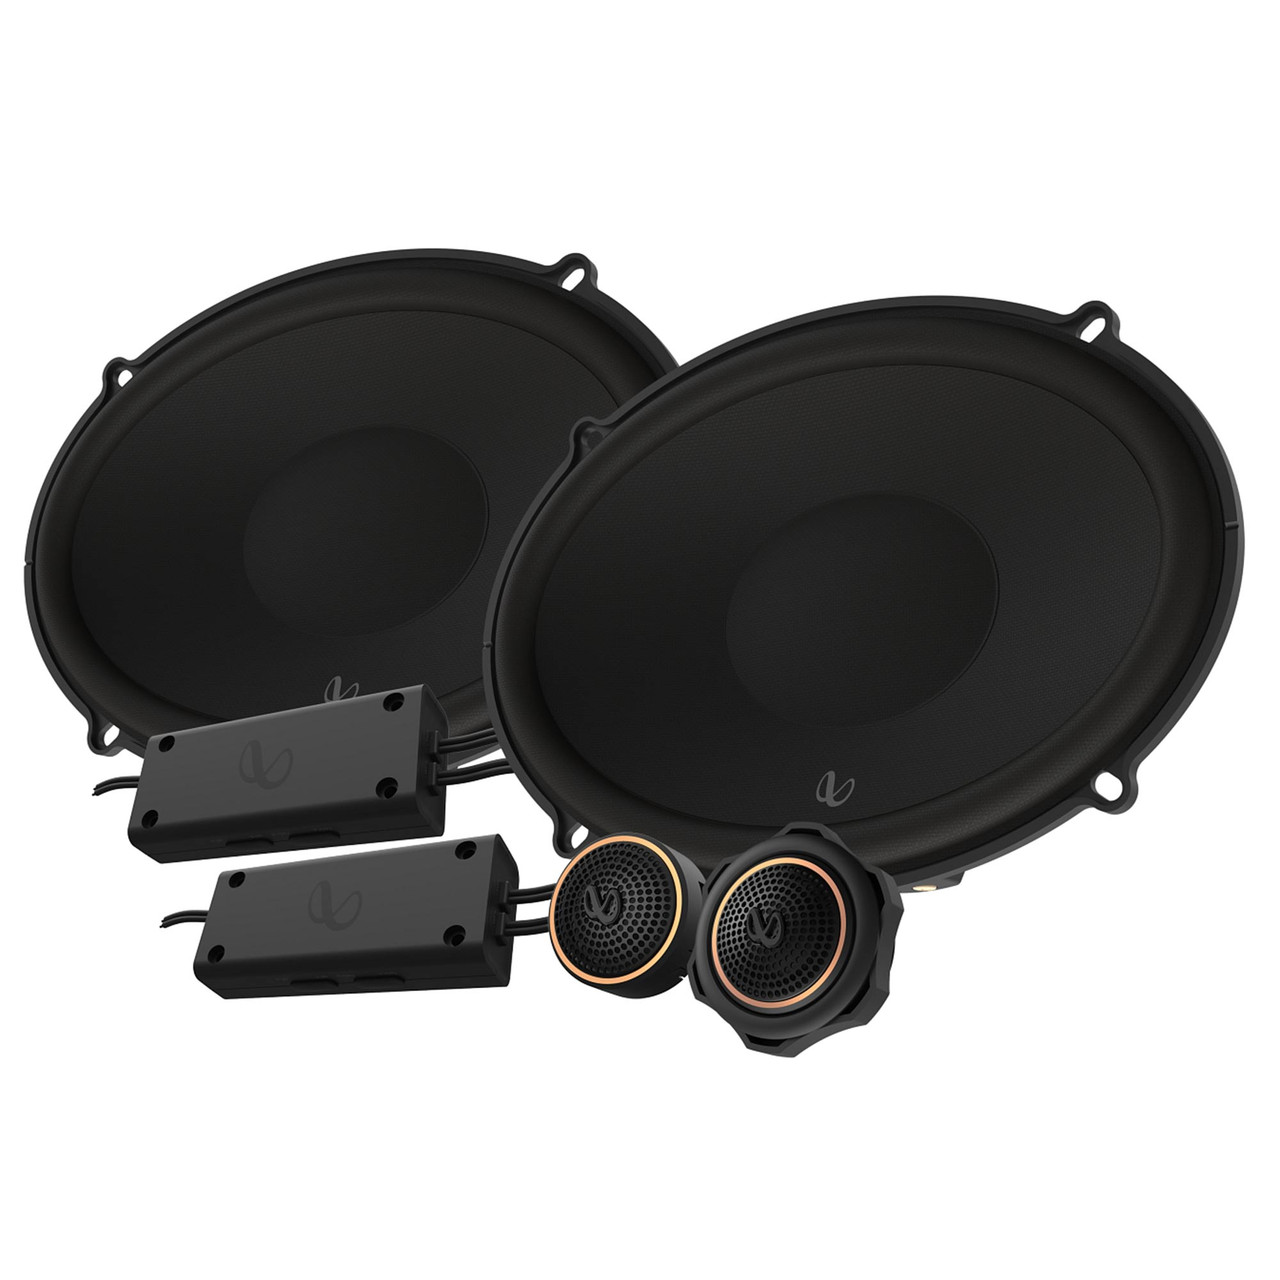 Infinity KAPPA693C 6" x 9" x 240mm) Two-way Component Speaker System Open Box - Creative Audio